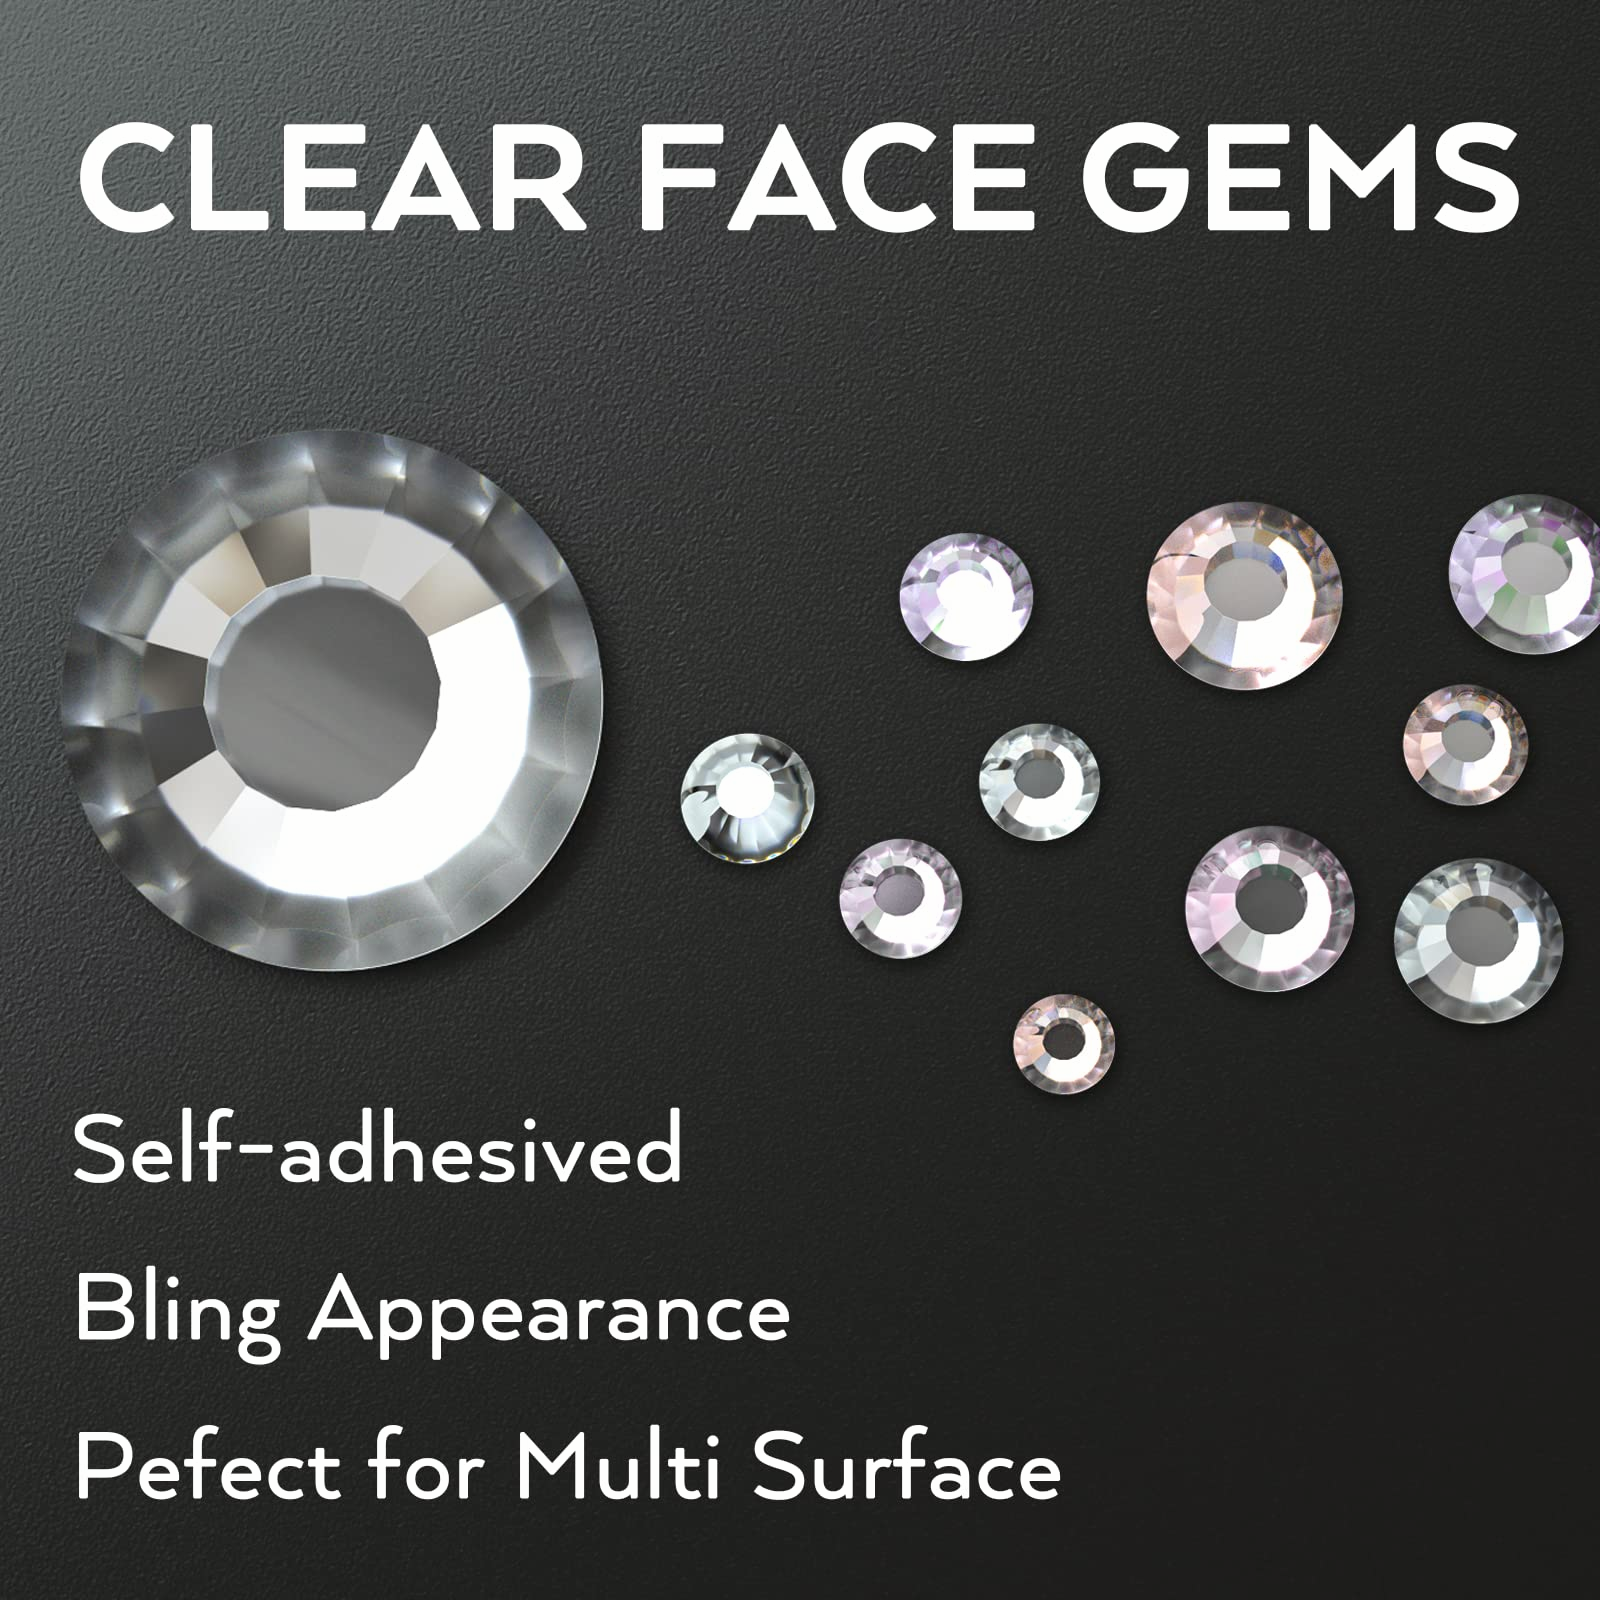 Rhinestone Stickers 2475 PCS, Nicpro Self Adhesive Face Gems Stick on Body Jewels Bling Decal Crystal in 3 Size 3 Clear Colors, 15 Embellishments Sheet for Decorations, Art, Crafts Nail Hair Makeup